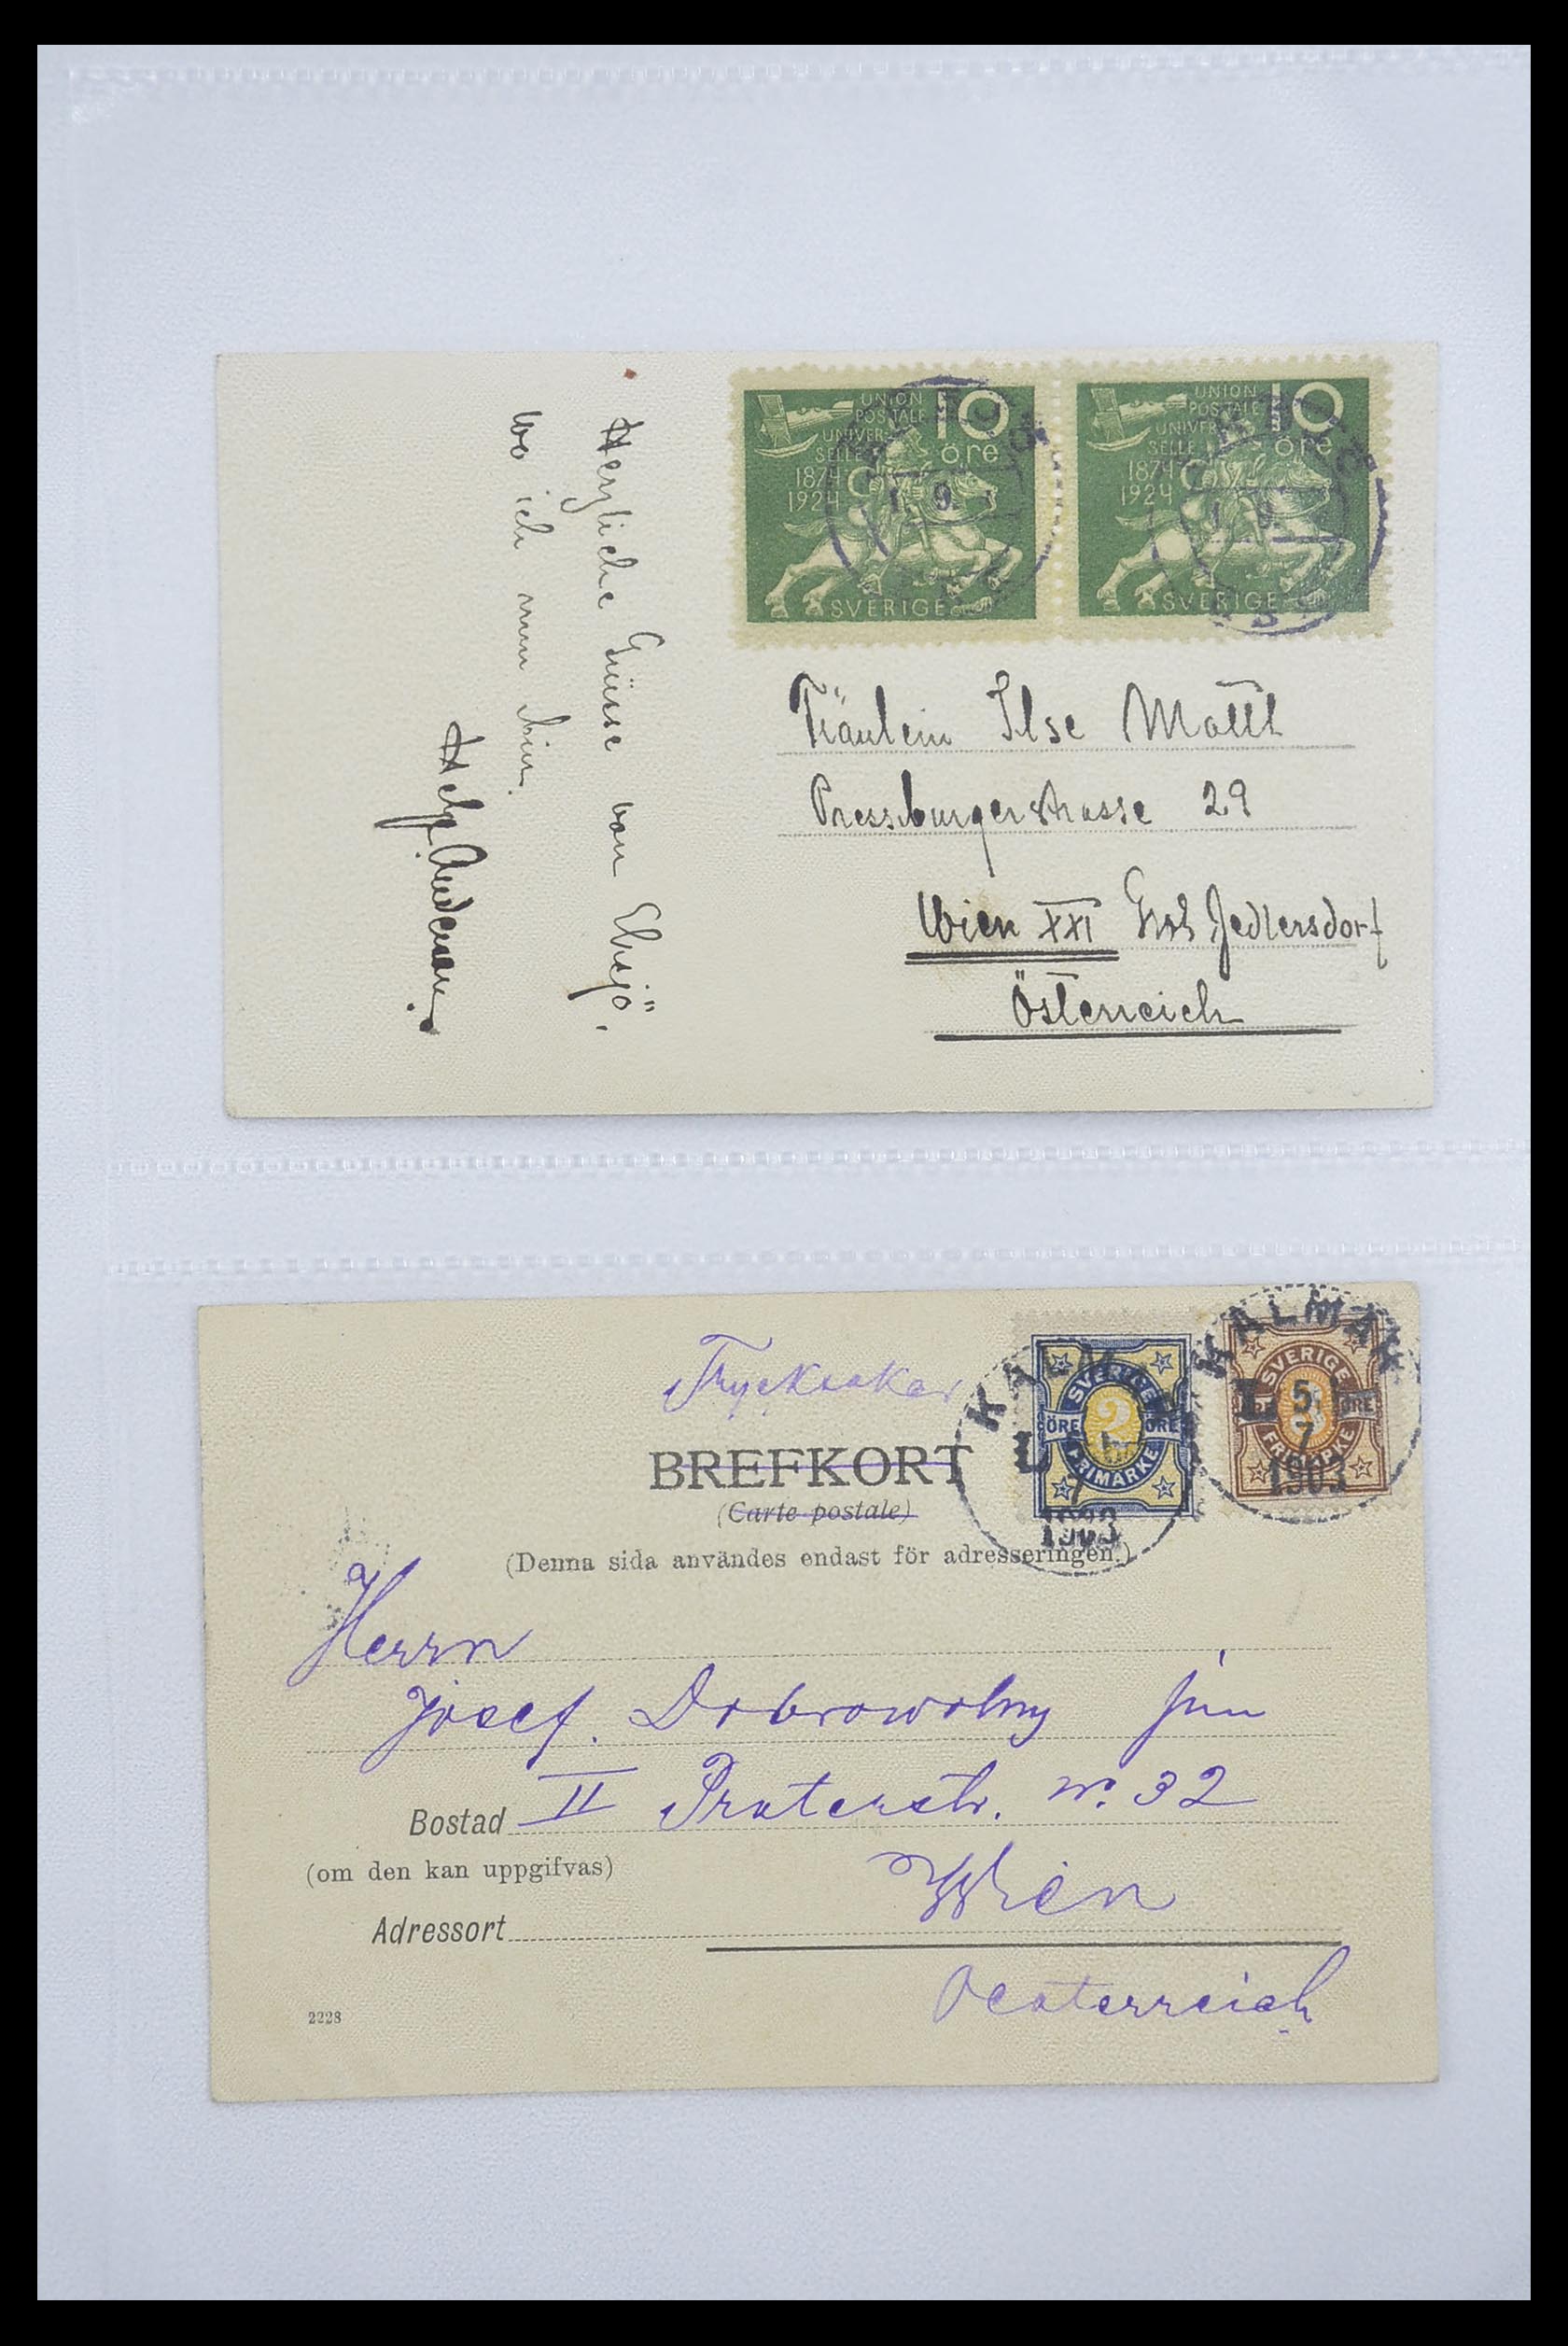 33241 011 - Stamp collection 33241 Scandinavia covers 1860-1930.